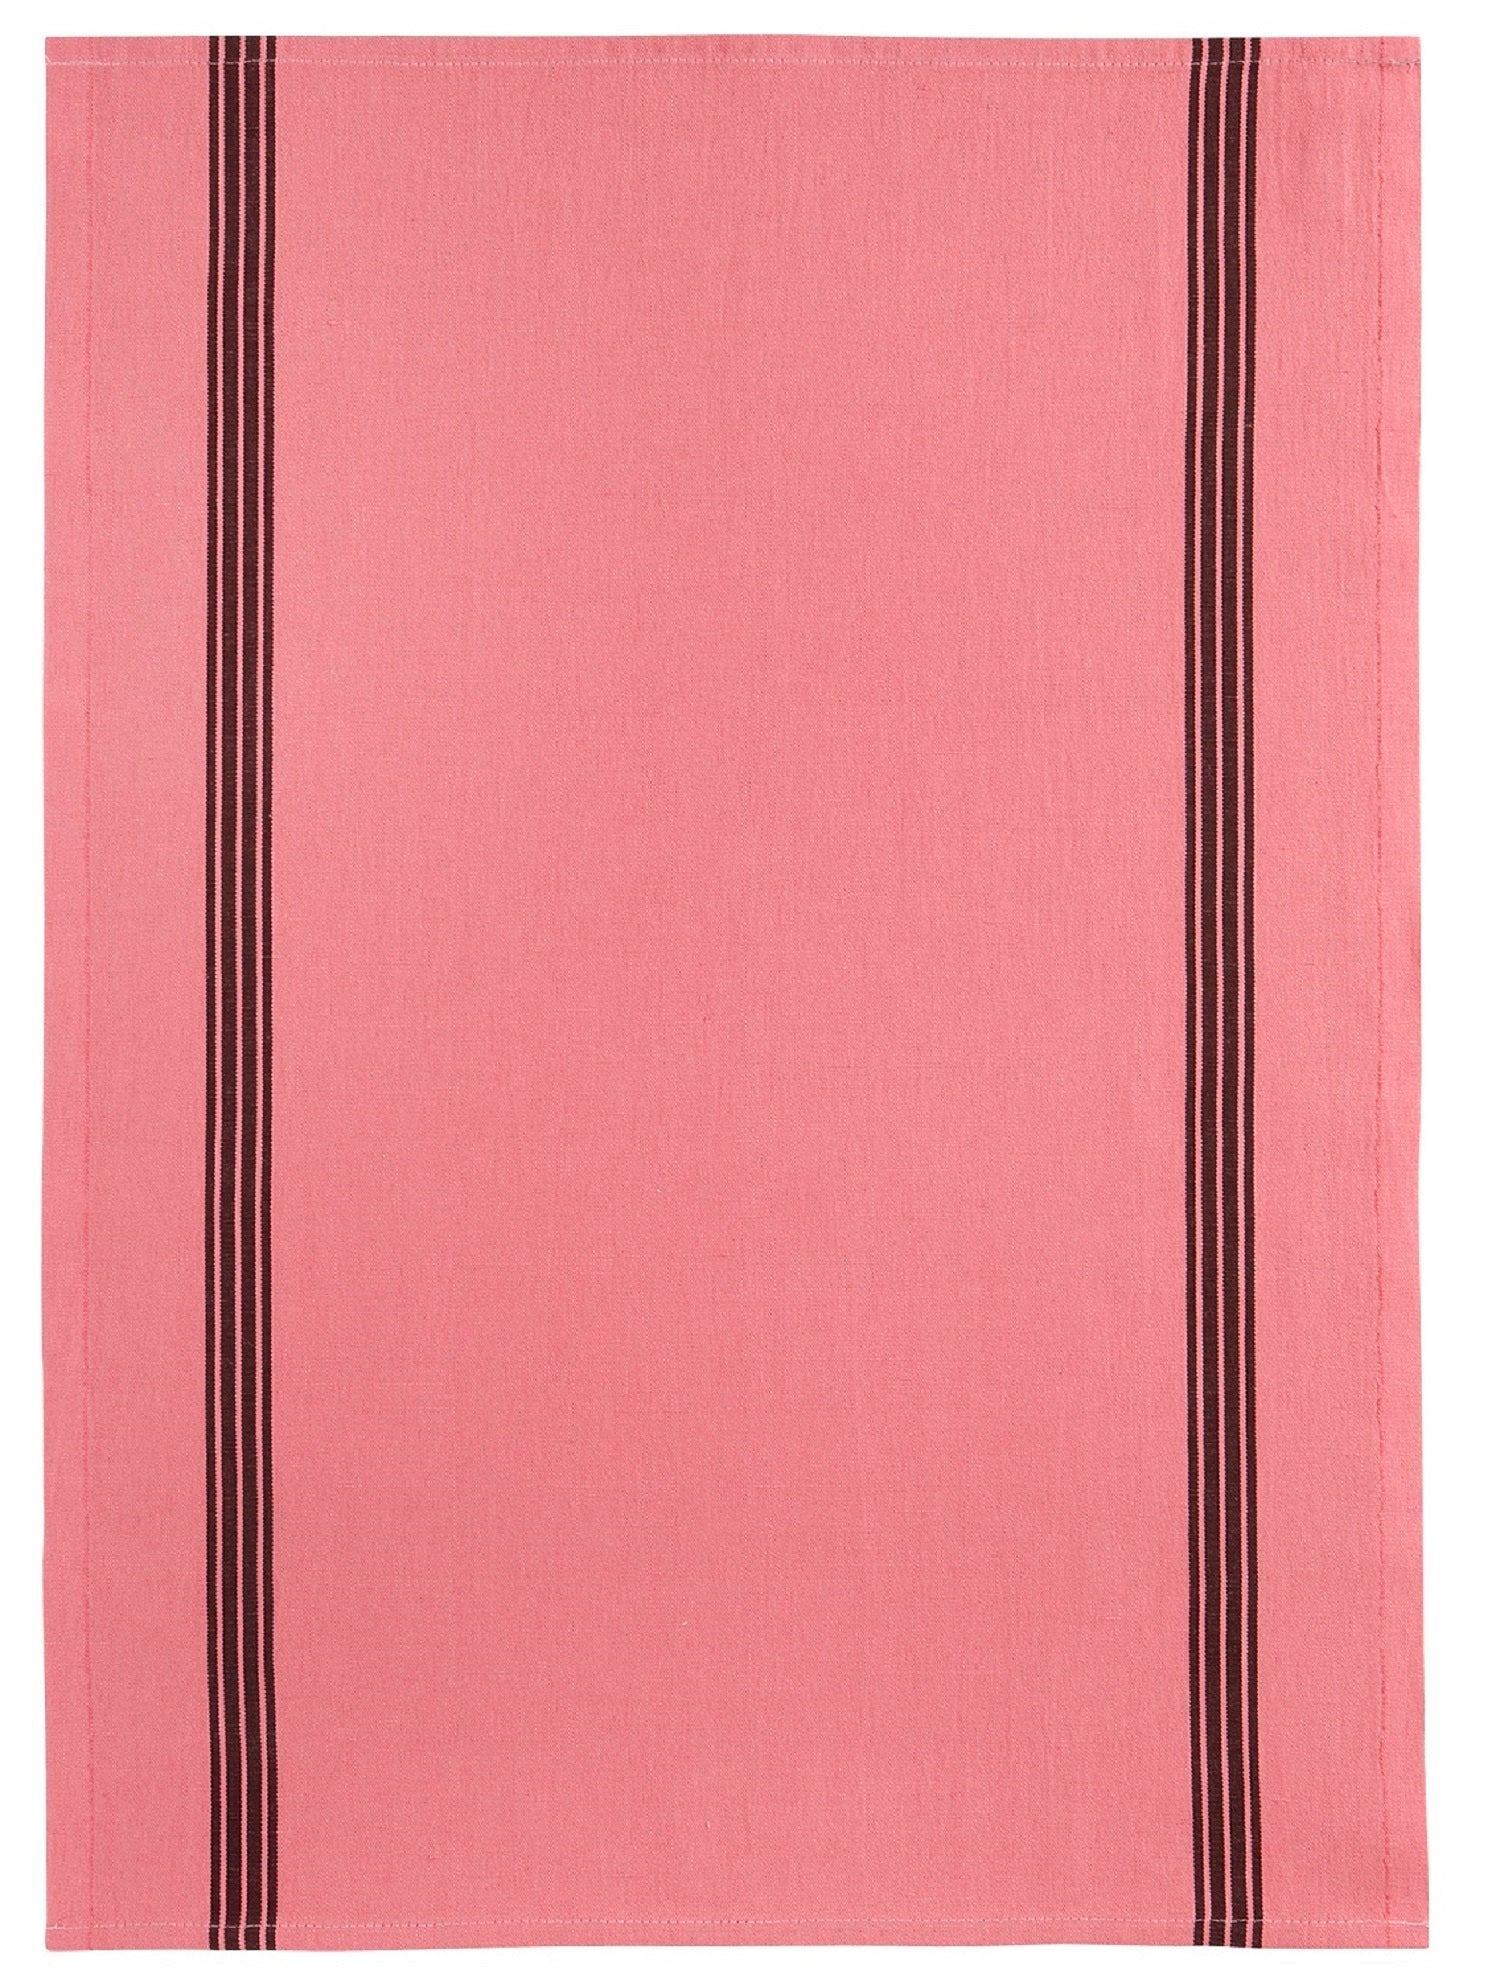 Charvet Editions "Piano" (Pink),  Washed, woven linen union tea towel. Made in France.